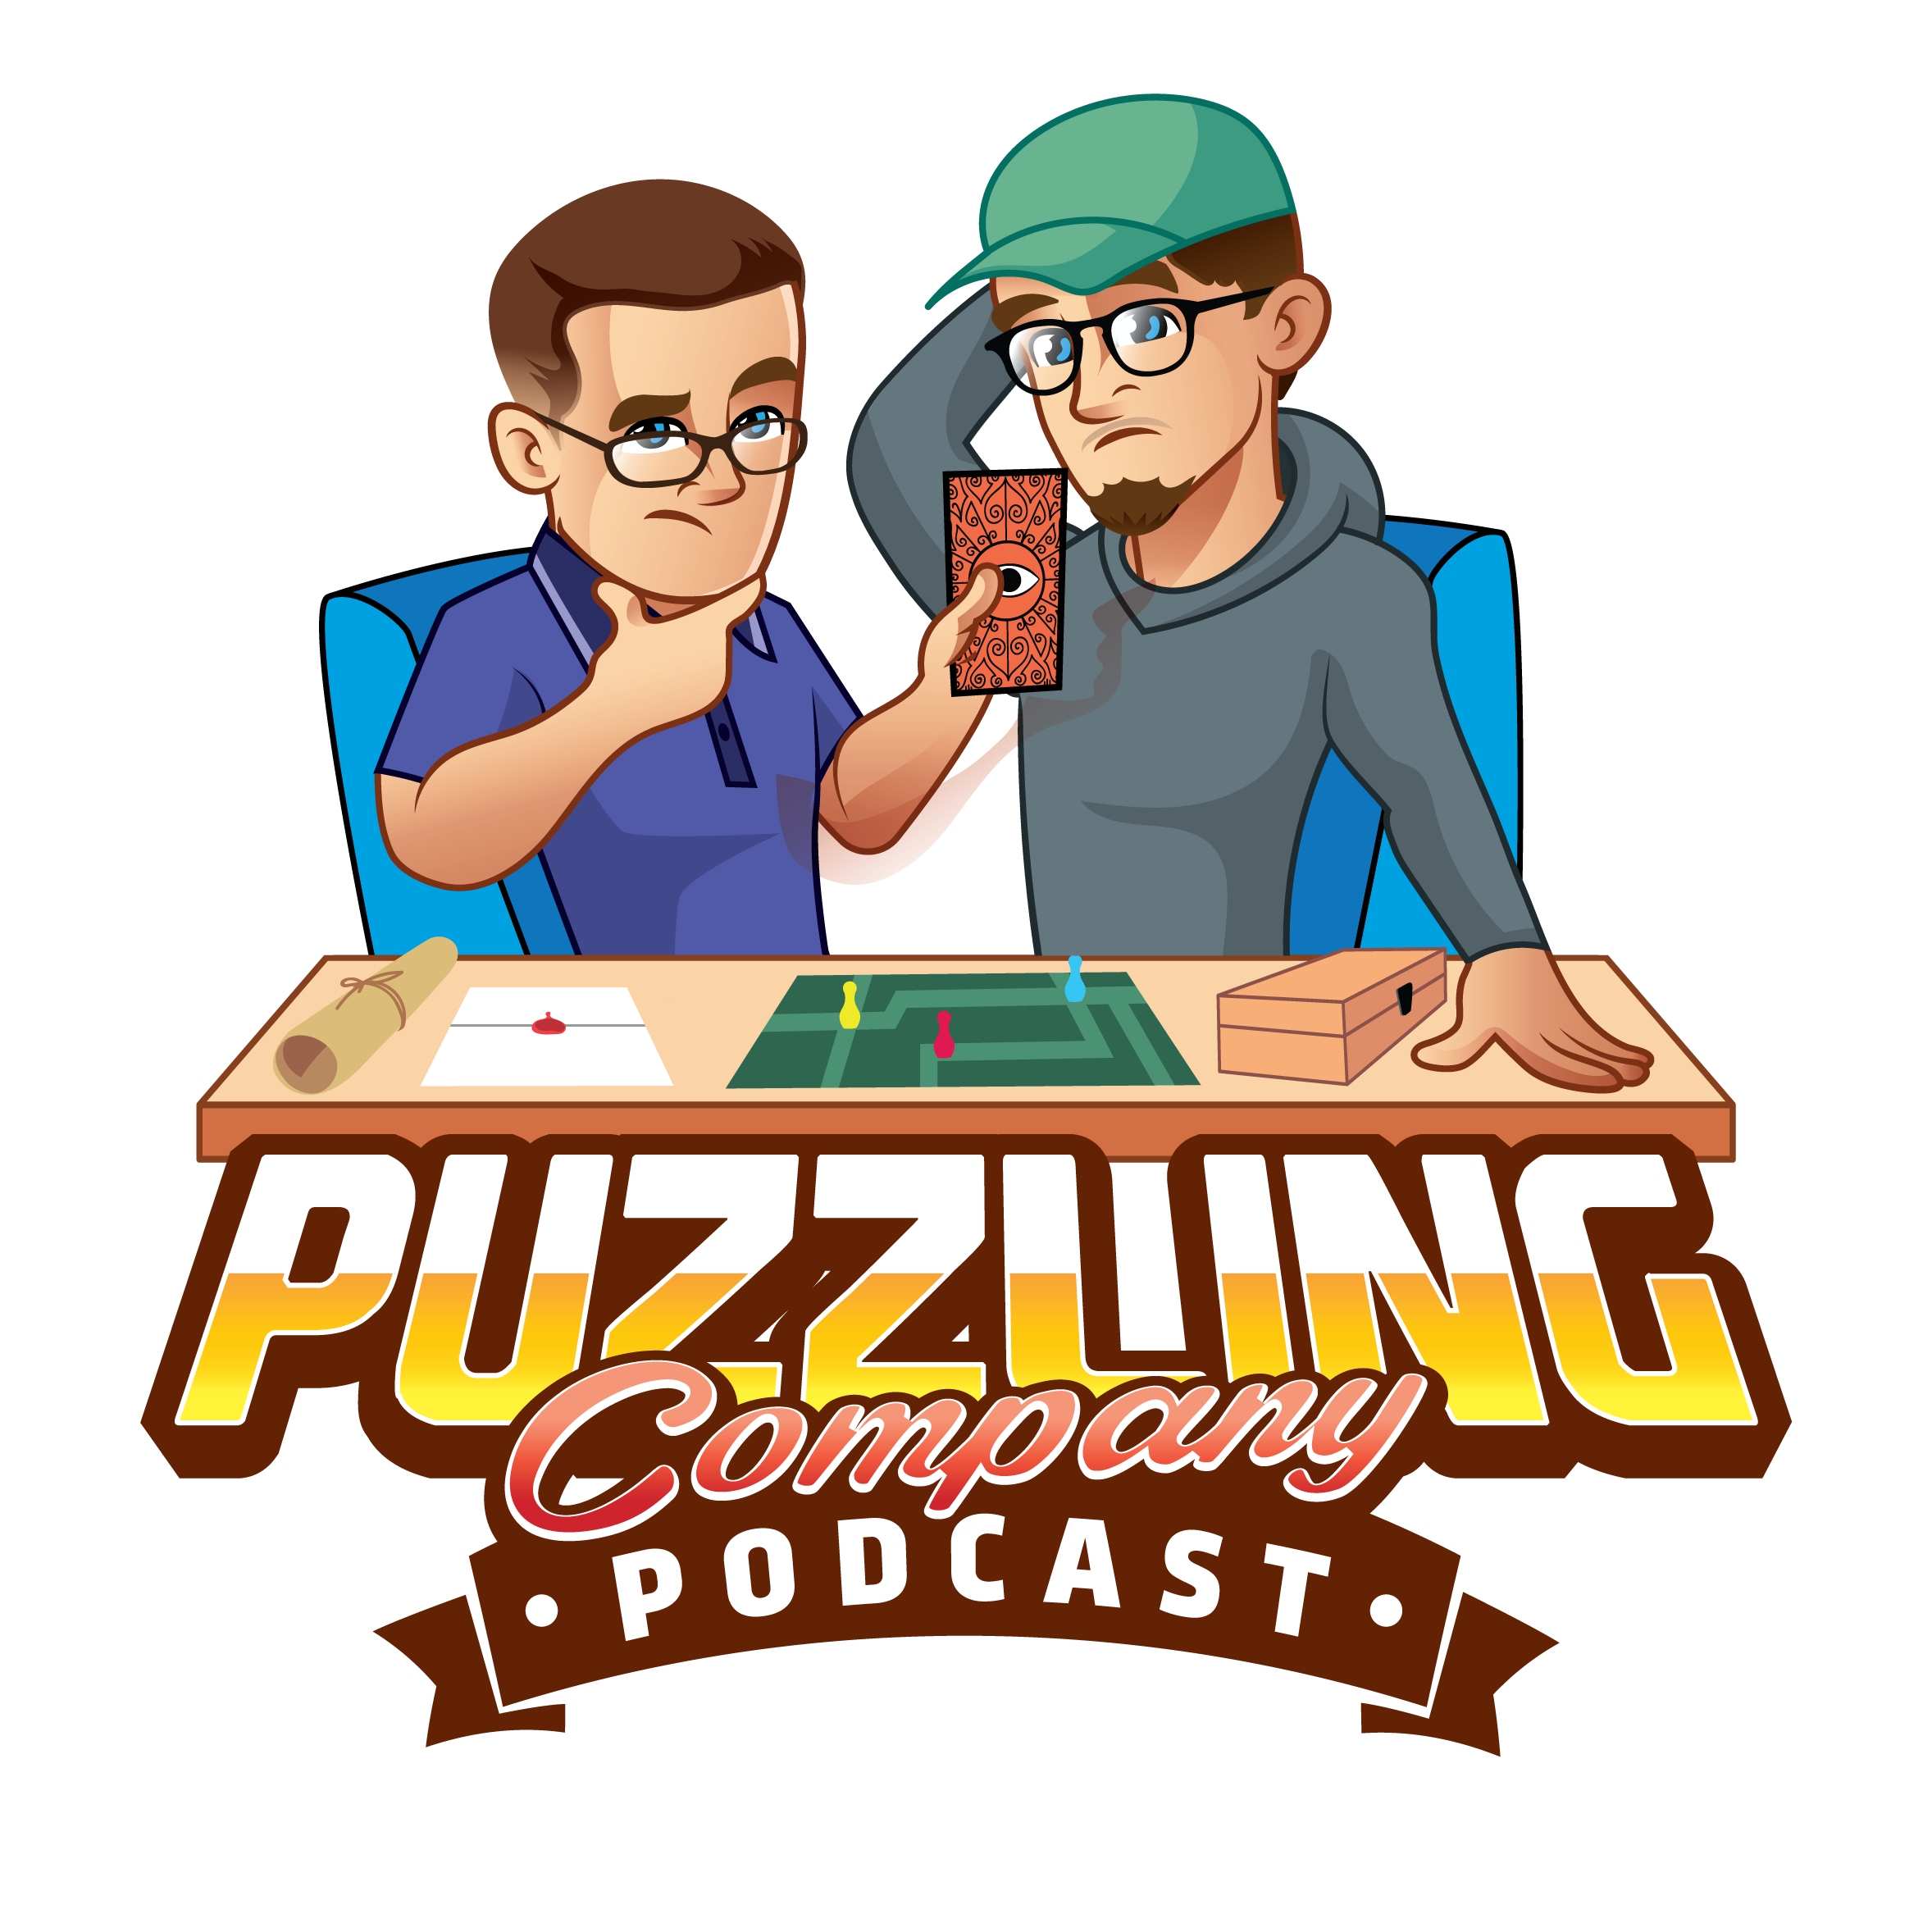 Puzzling Company Podcast